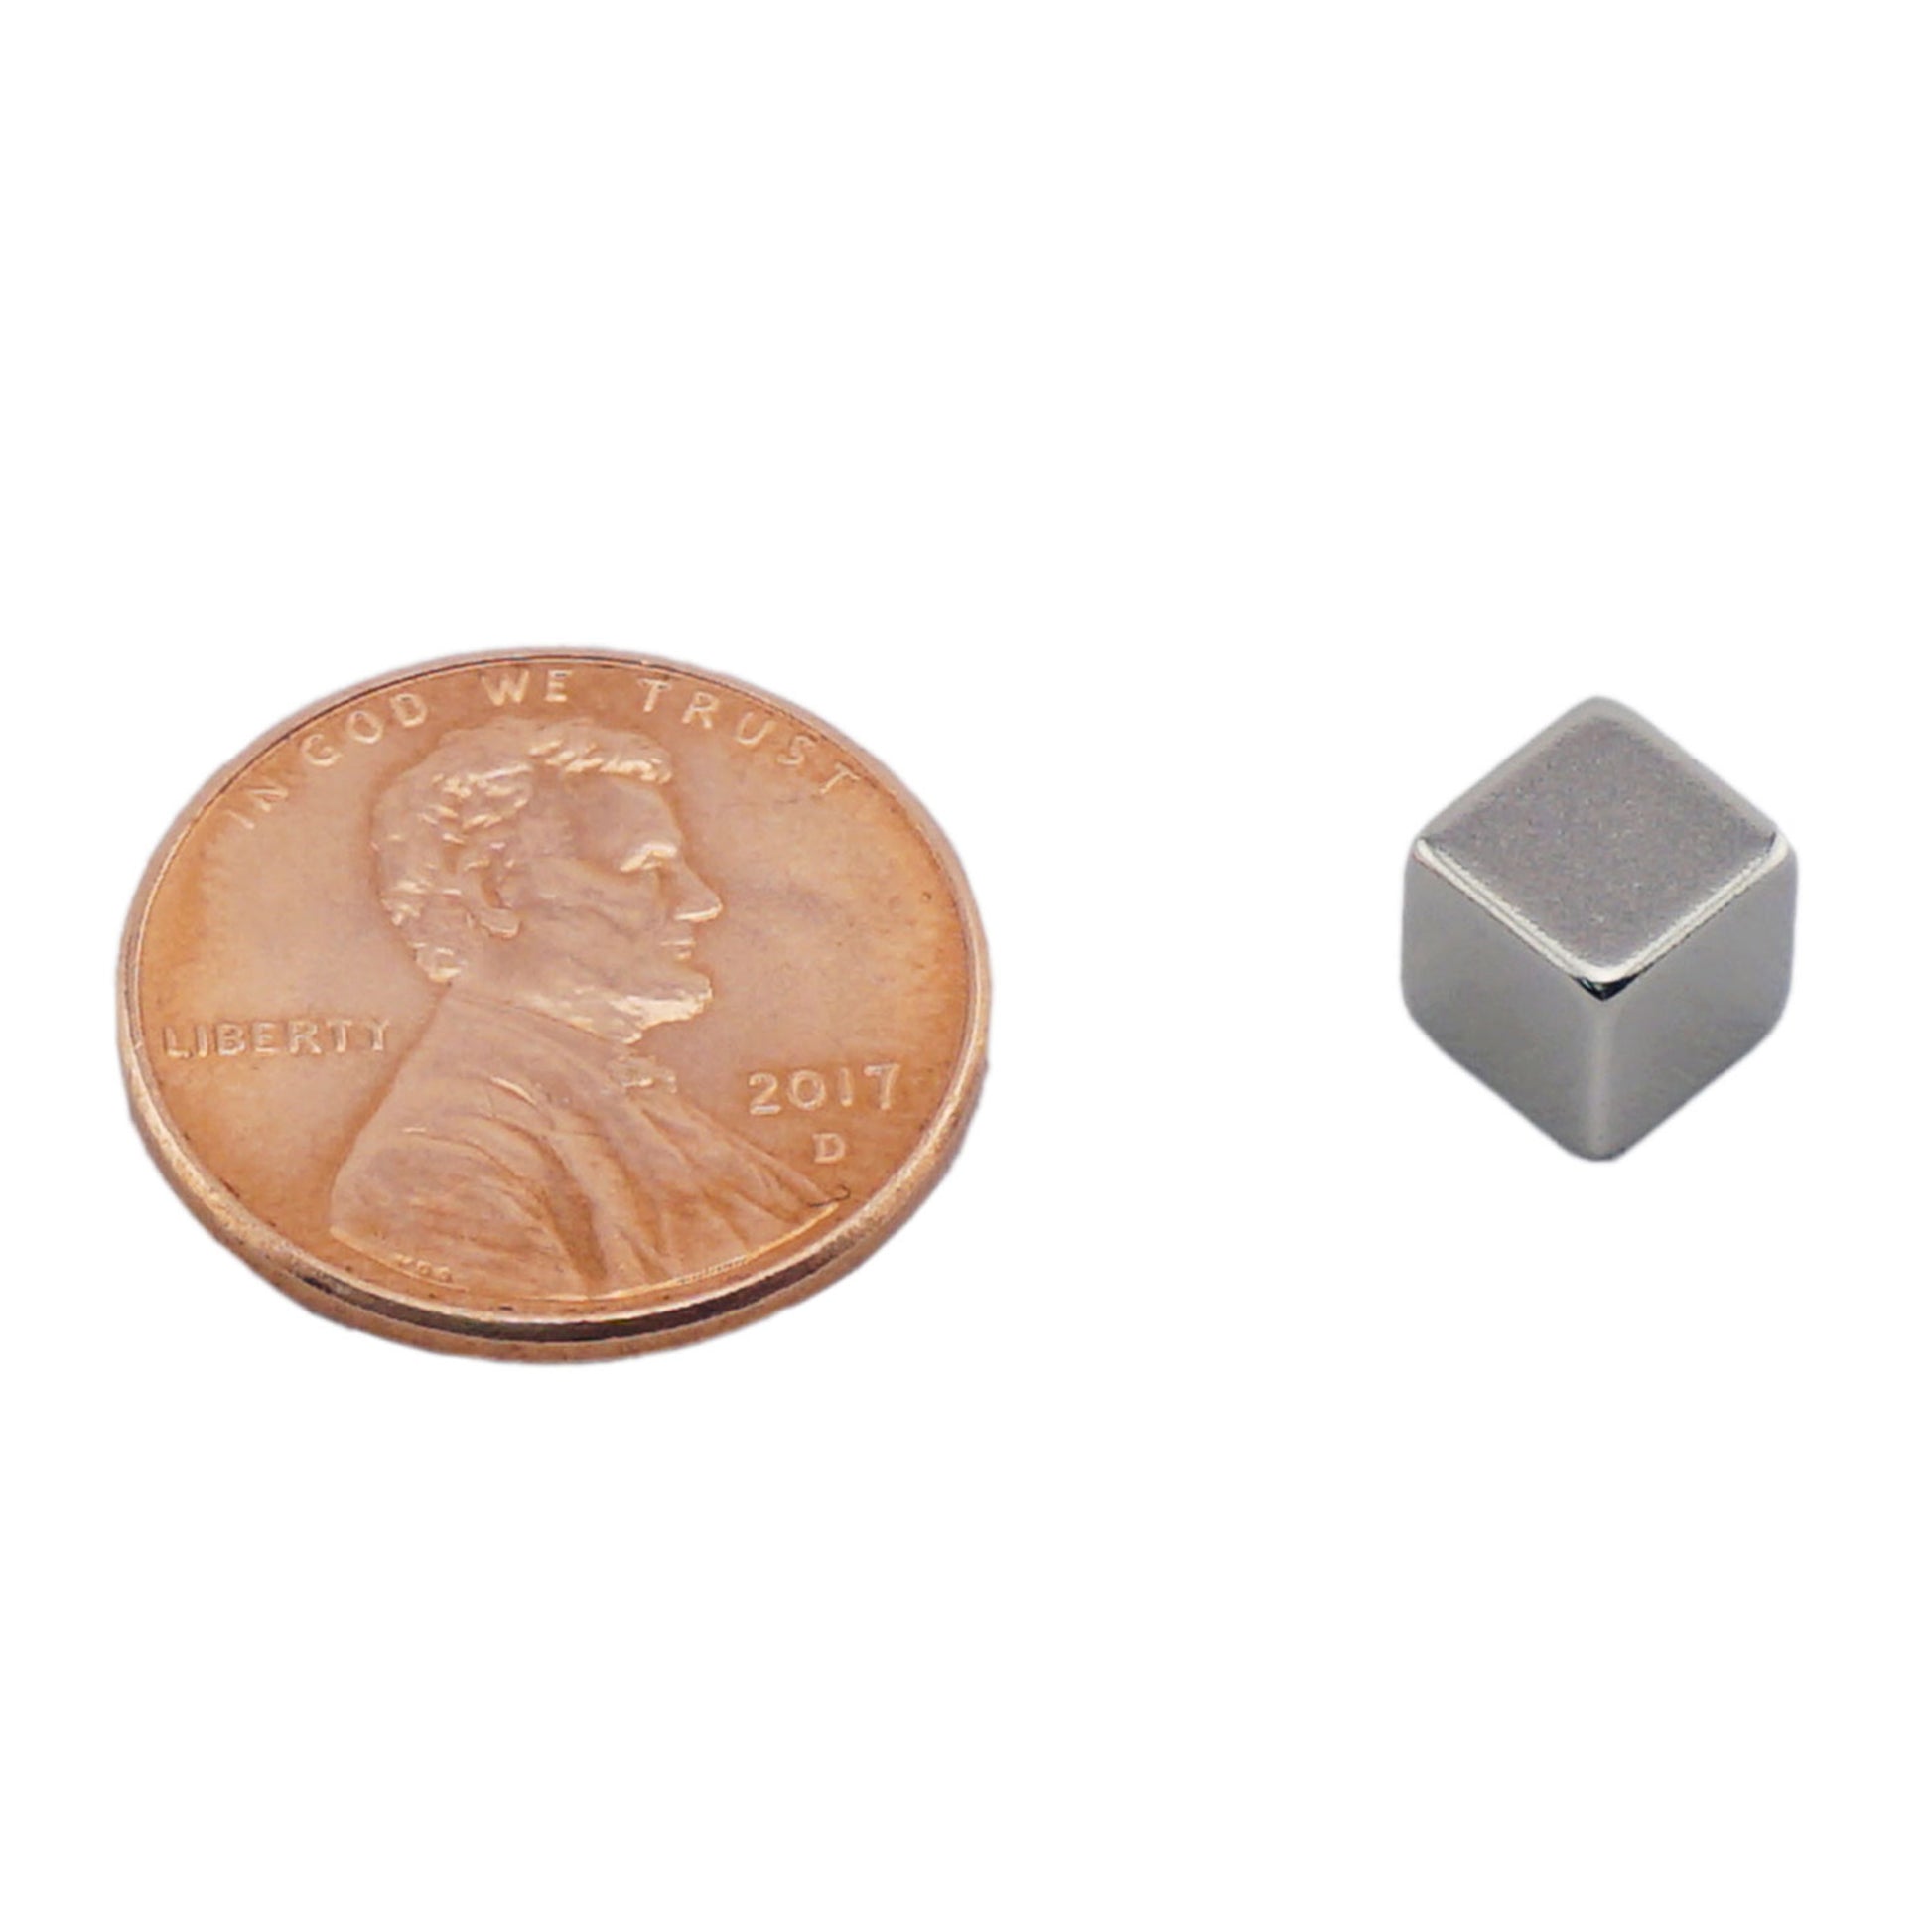 Load image into Gallery viewer, NB002557N Neodymium Block Magnet - Compared to Penny for Size Reference